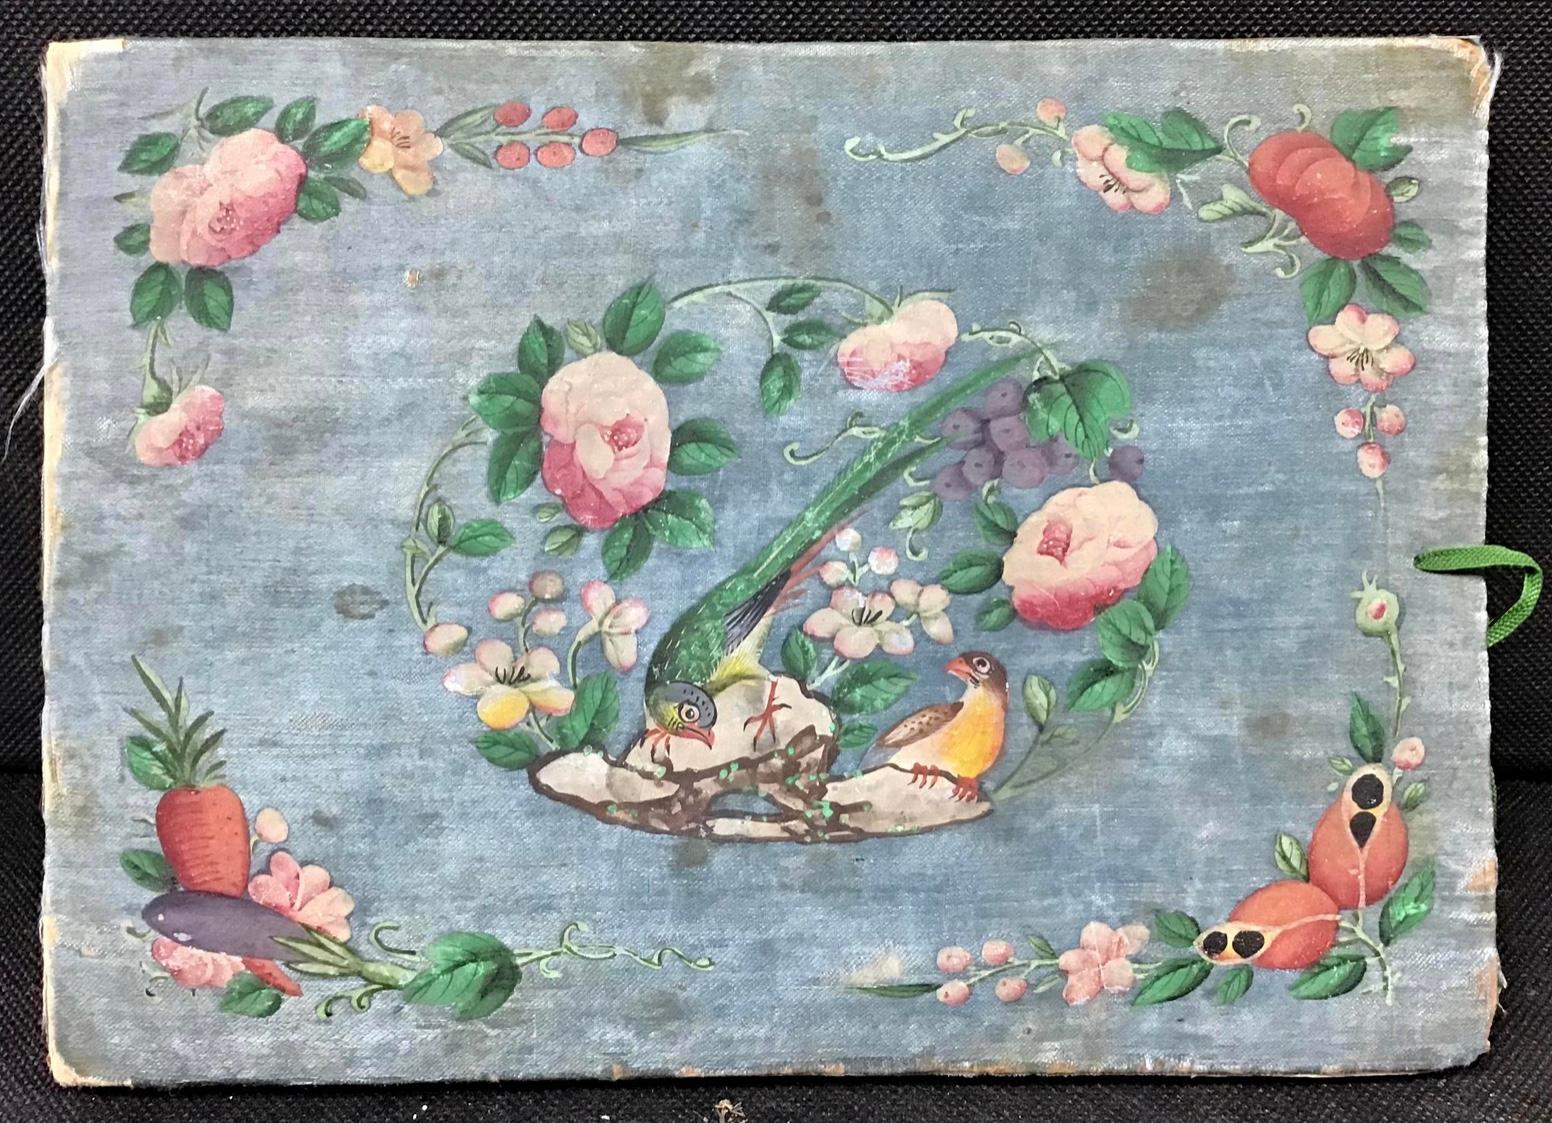 Vibrant set of 12 gouache paintings on pith paper still in the original silk covered hand painted book. Mid-19th century Chinese. Very good condition with some splits and tears as would be expected. The set depicting Chinese ceremonial court scenes